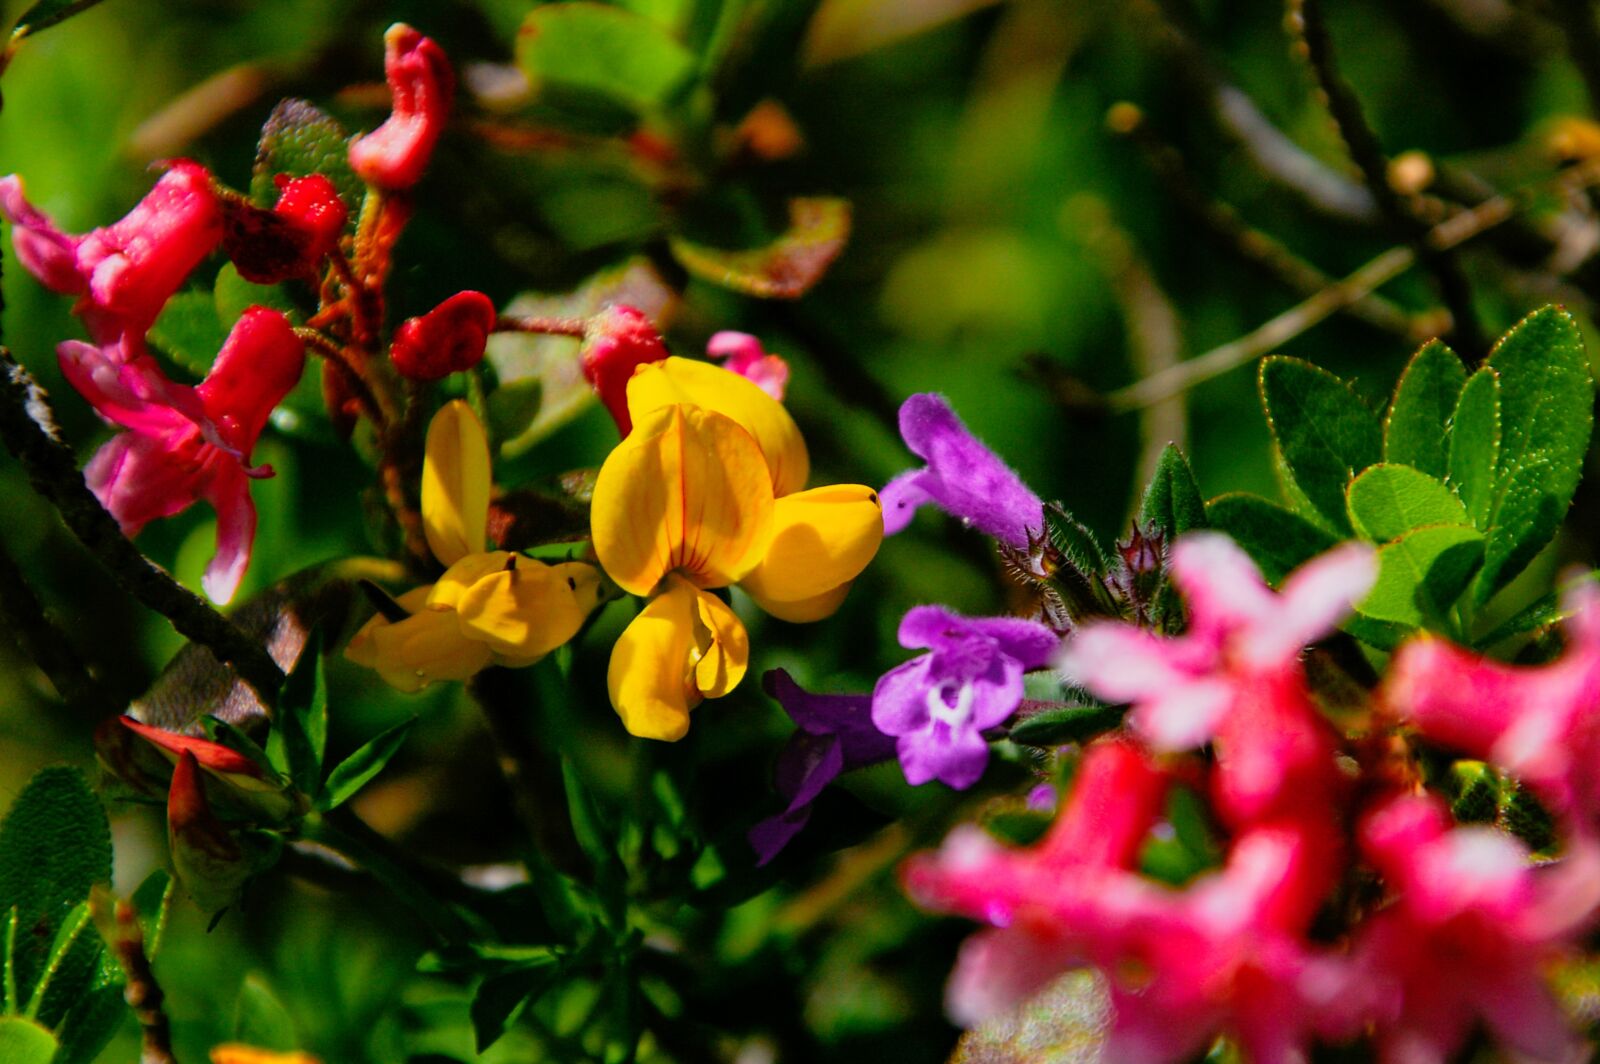 Pentax *ist DS sample photo. Mountain flowers, fenugreek, colorful photography